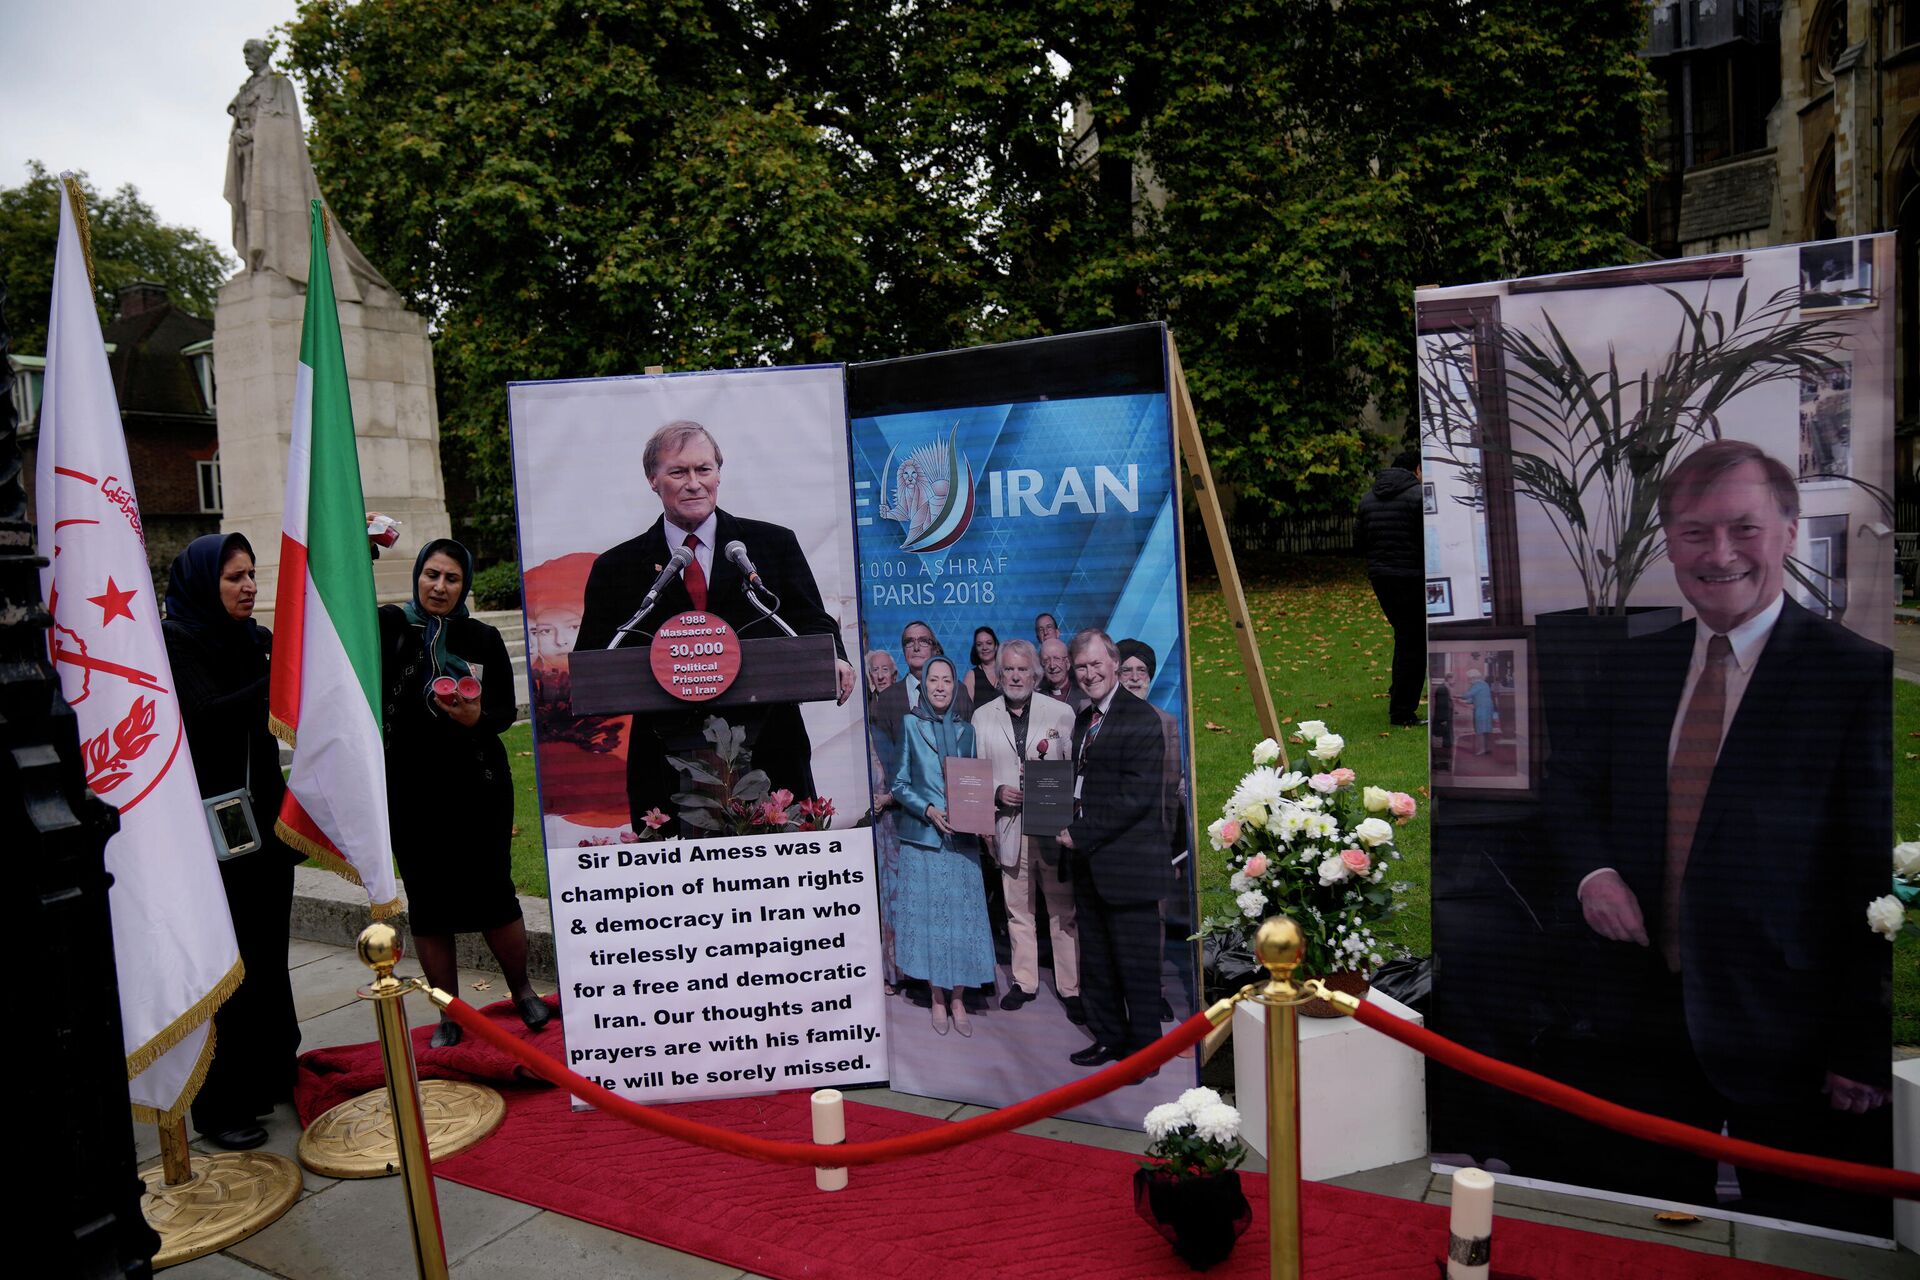 Images of British Member of Parliament David Amess are displayed opposite the Houses of Parliament in London, placed there as a memorial by supporters of the National Council of Resistance of Iran (NCRI), Monday, Oct. 18, 2021 - Sputnik International, 1920, 22.11.2021